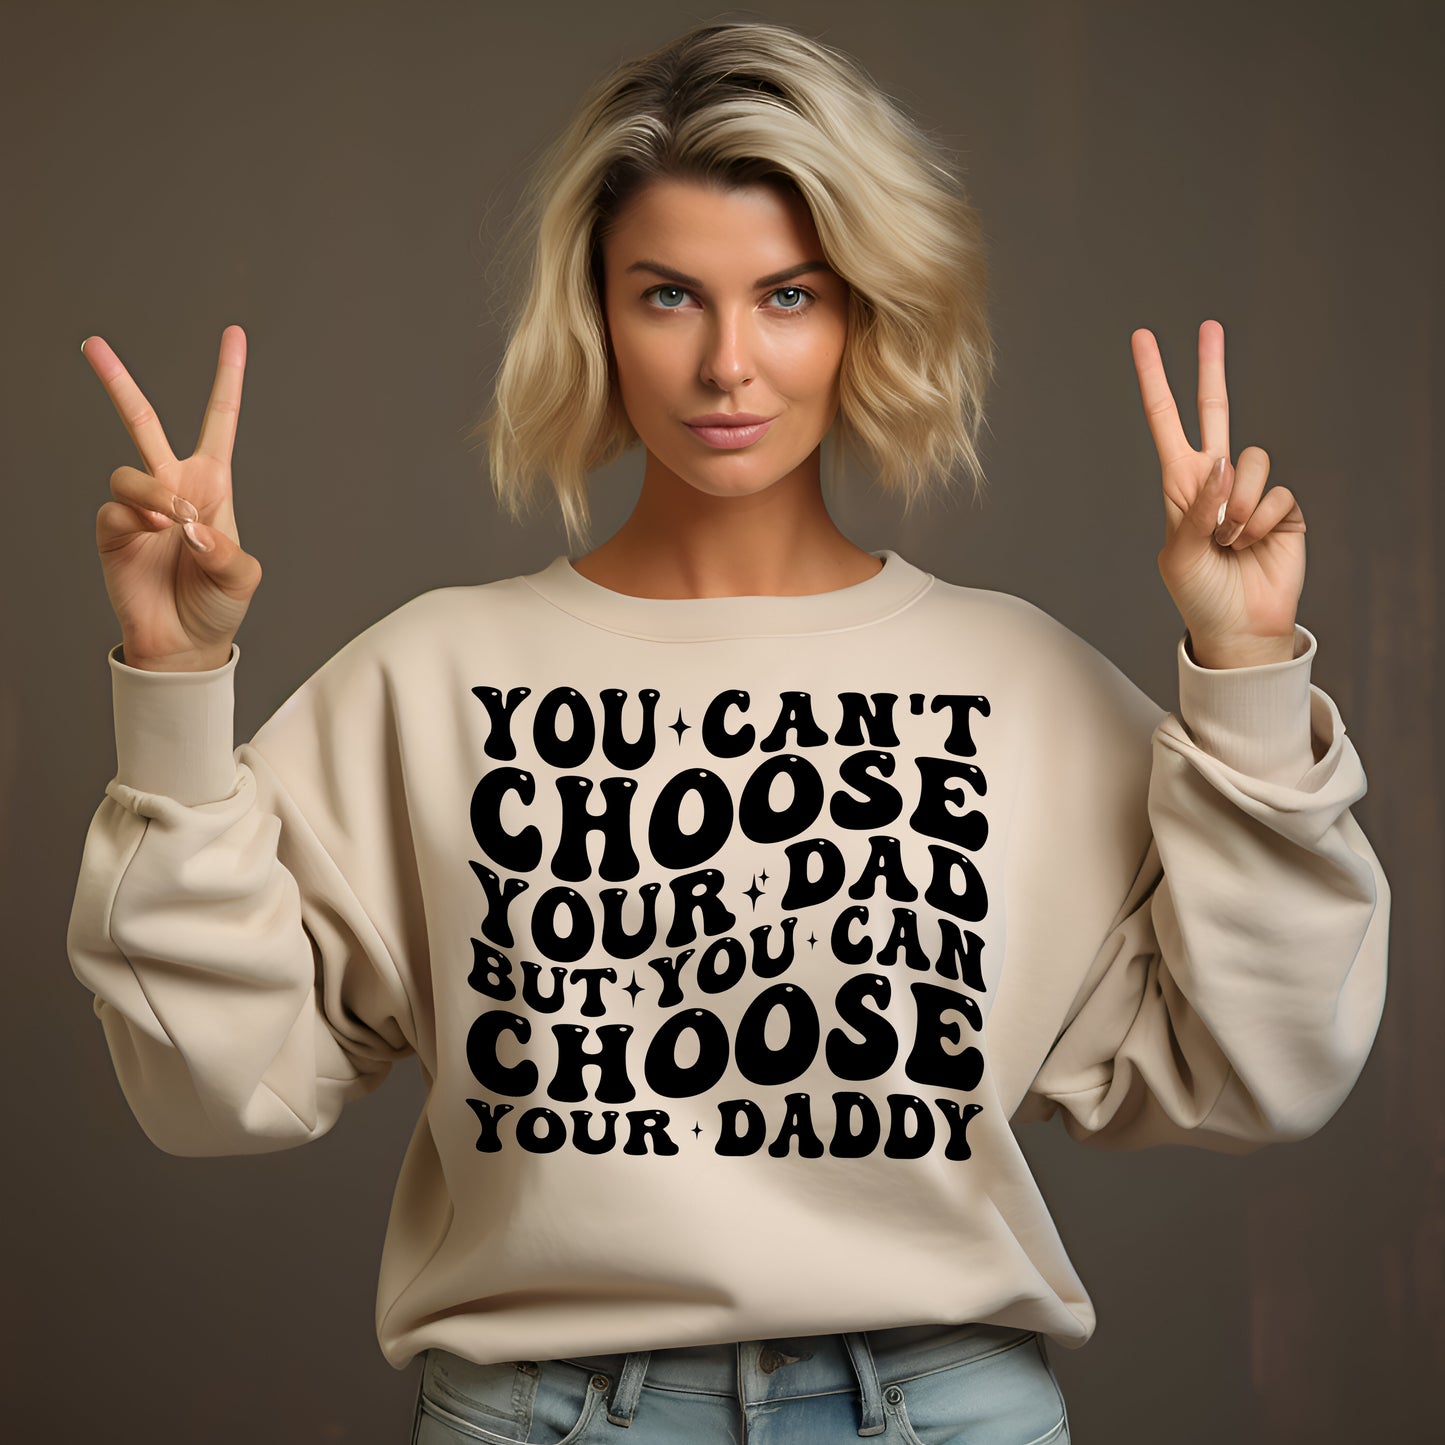 You Can’t Choose Your Dad but You Can Choose Your Daddy- Single Color (black)- 11.5" wide Screen Print Transfer